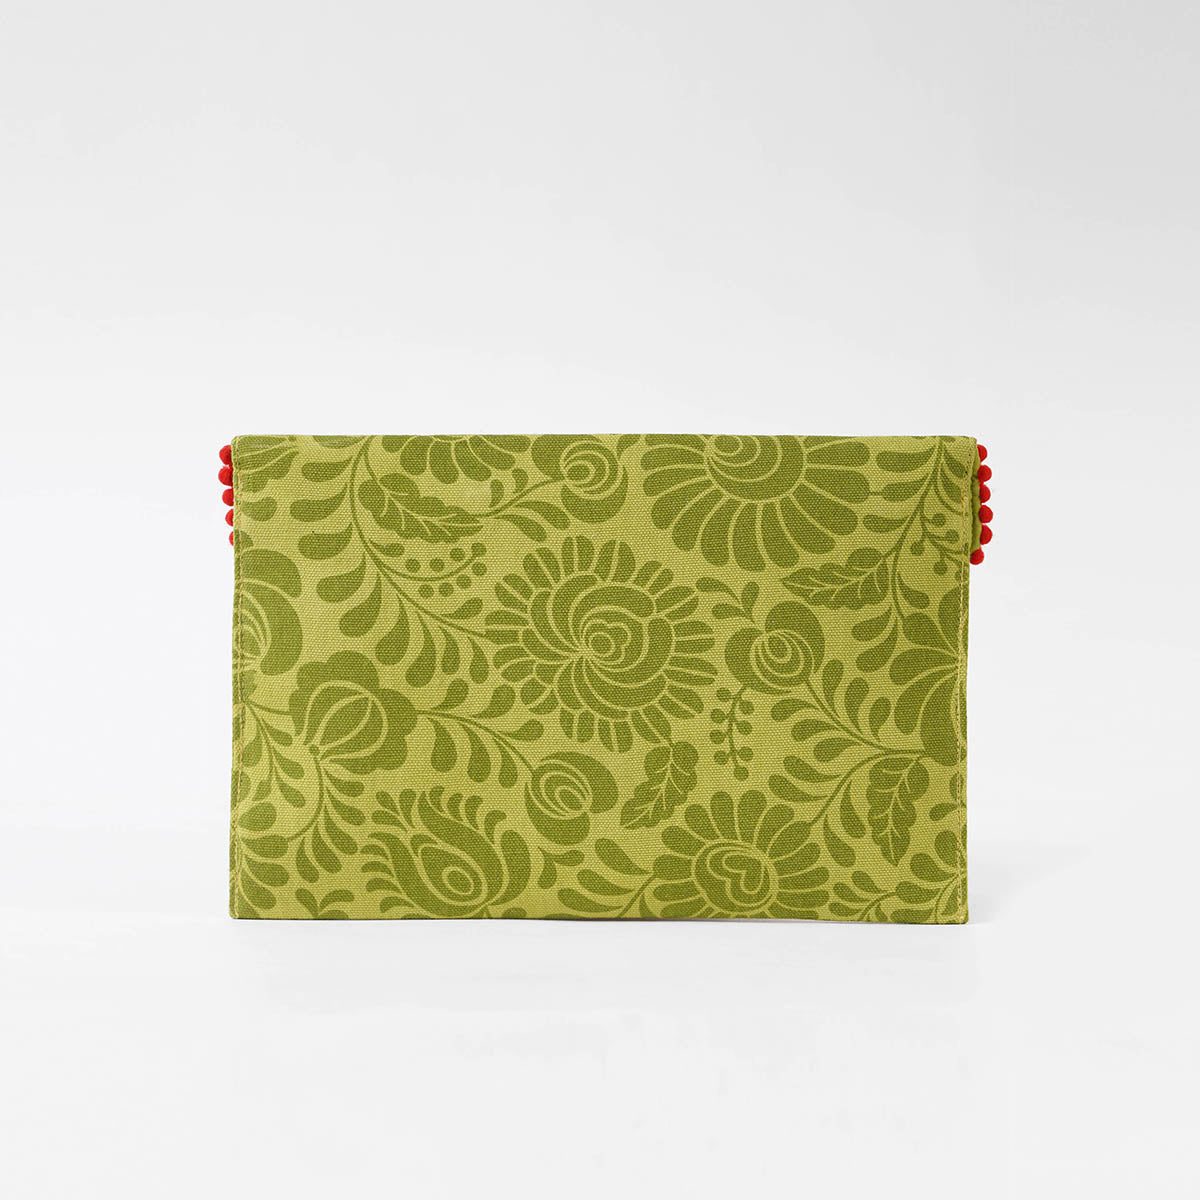 Matyo - Green colour Printed and Embroidered Envelope clutch, foldover purse,6X9 inches